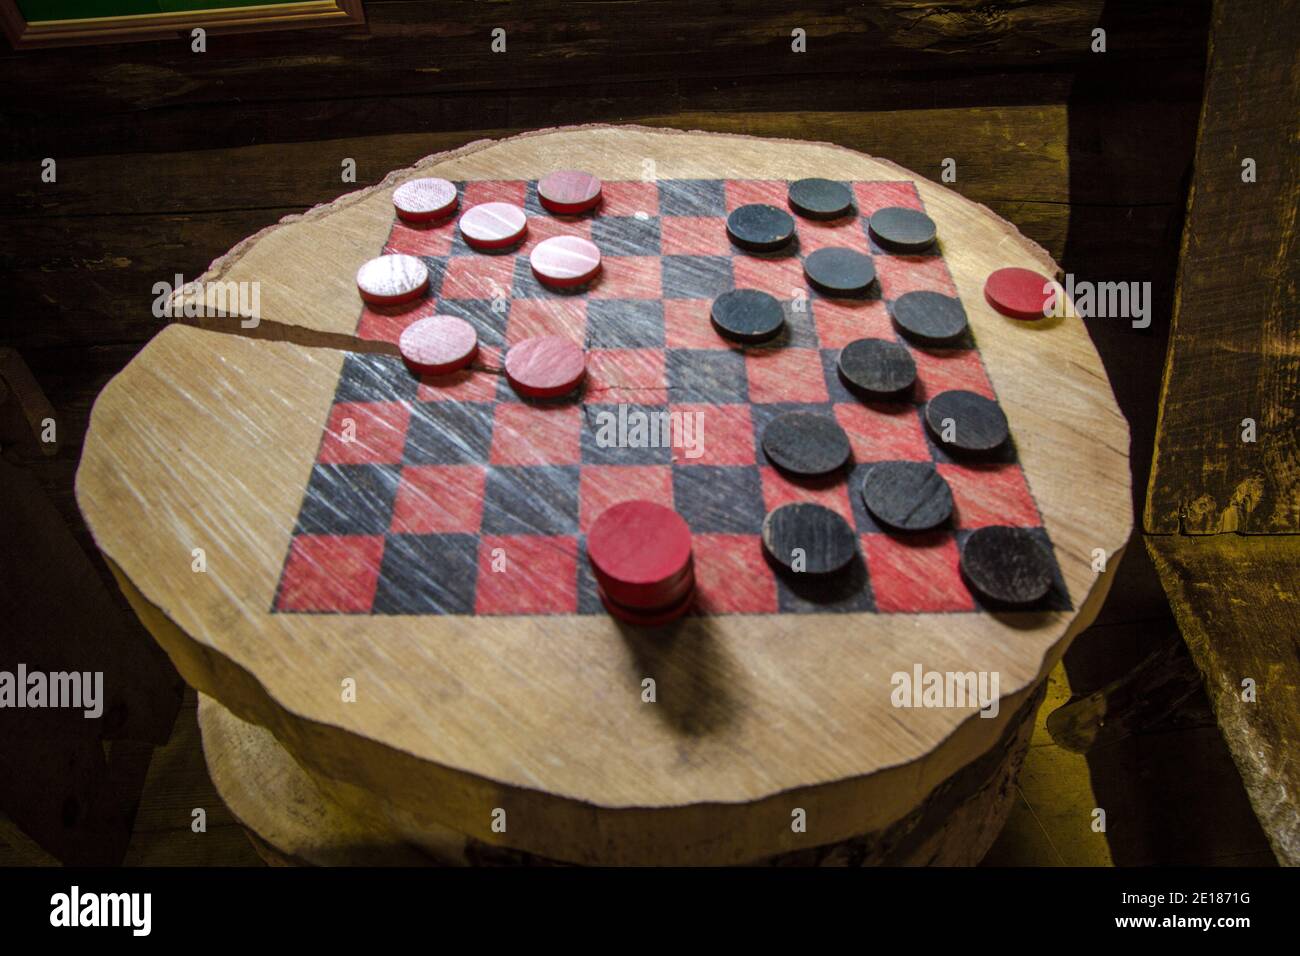 Traditional board game of checkers in horizontal orientation and shot from above. Stock Photo